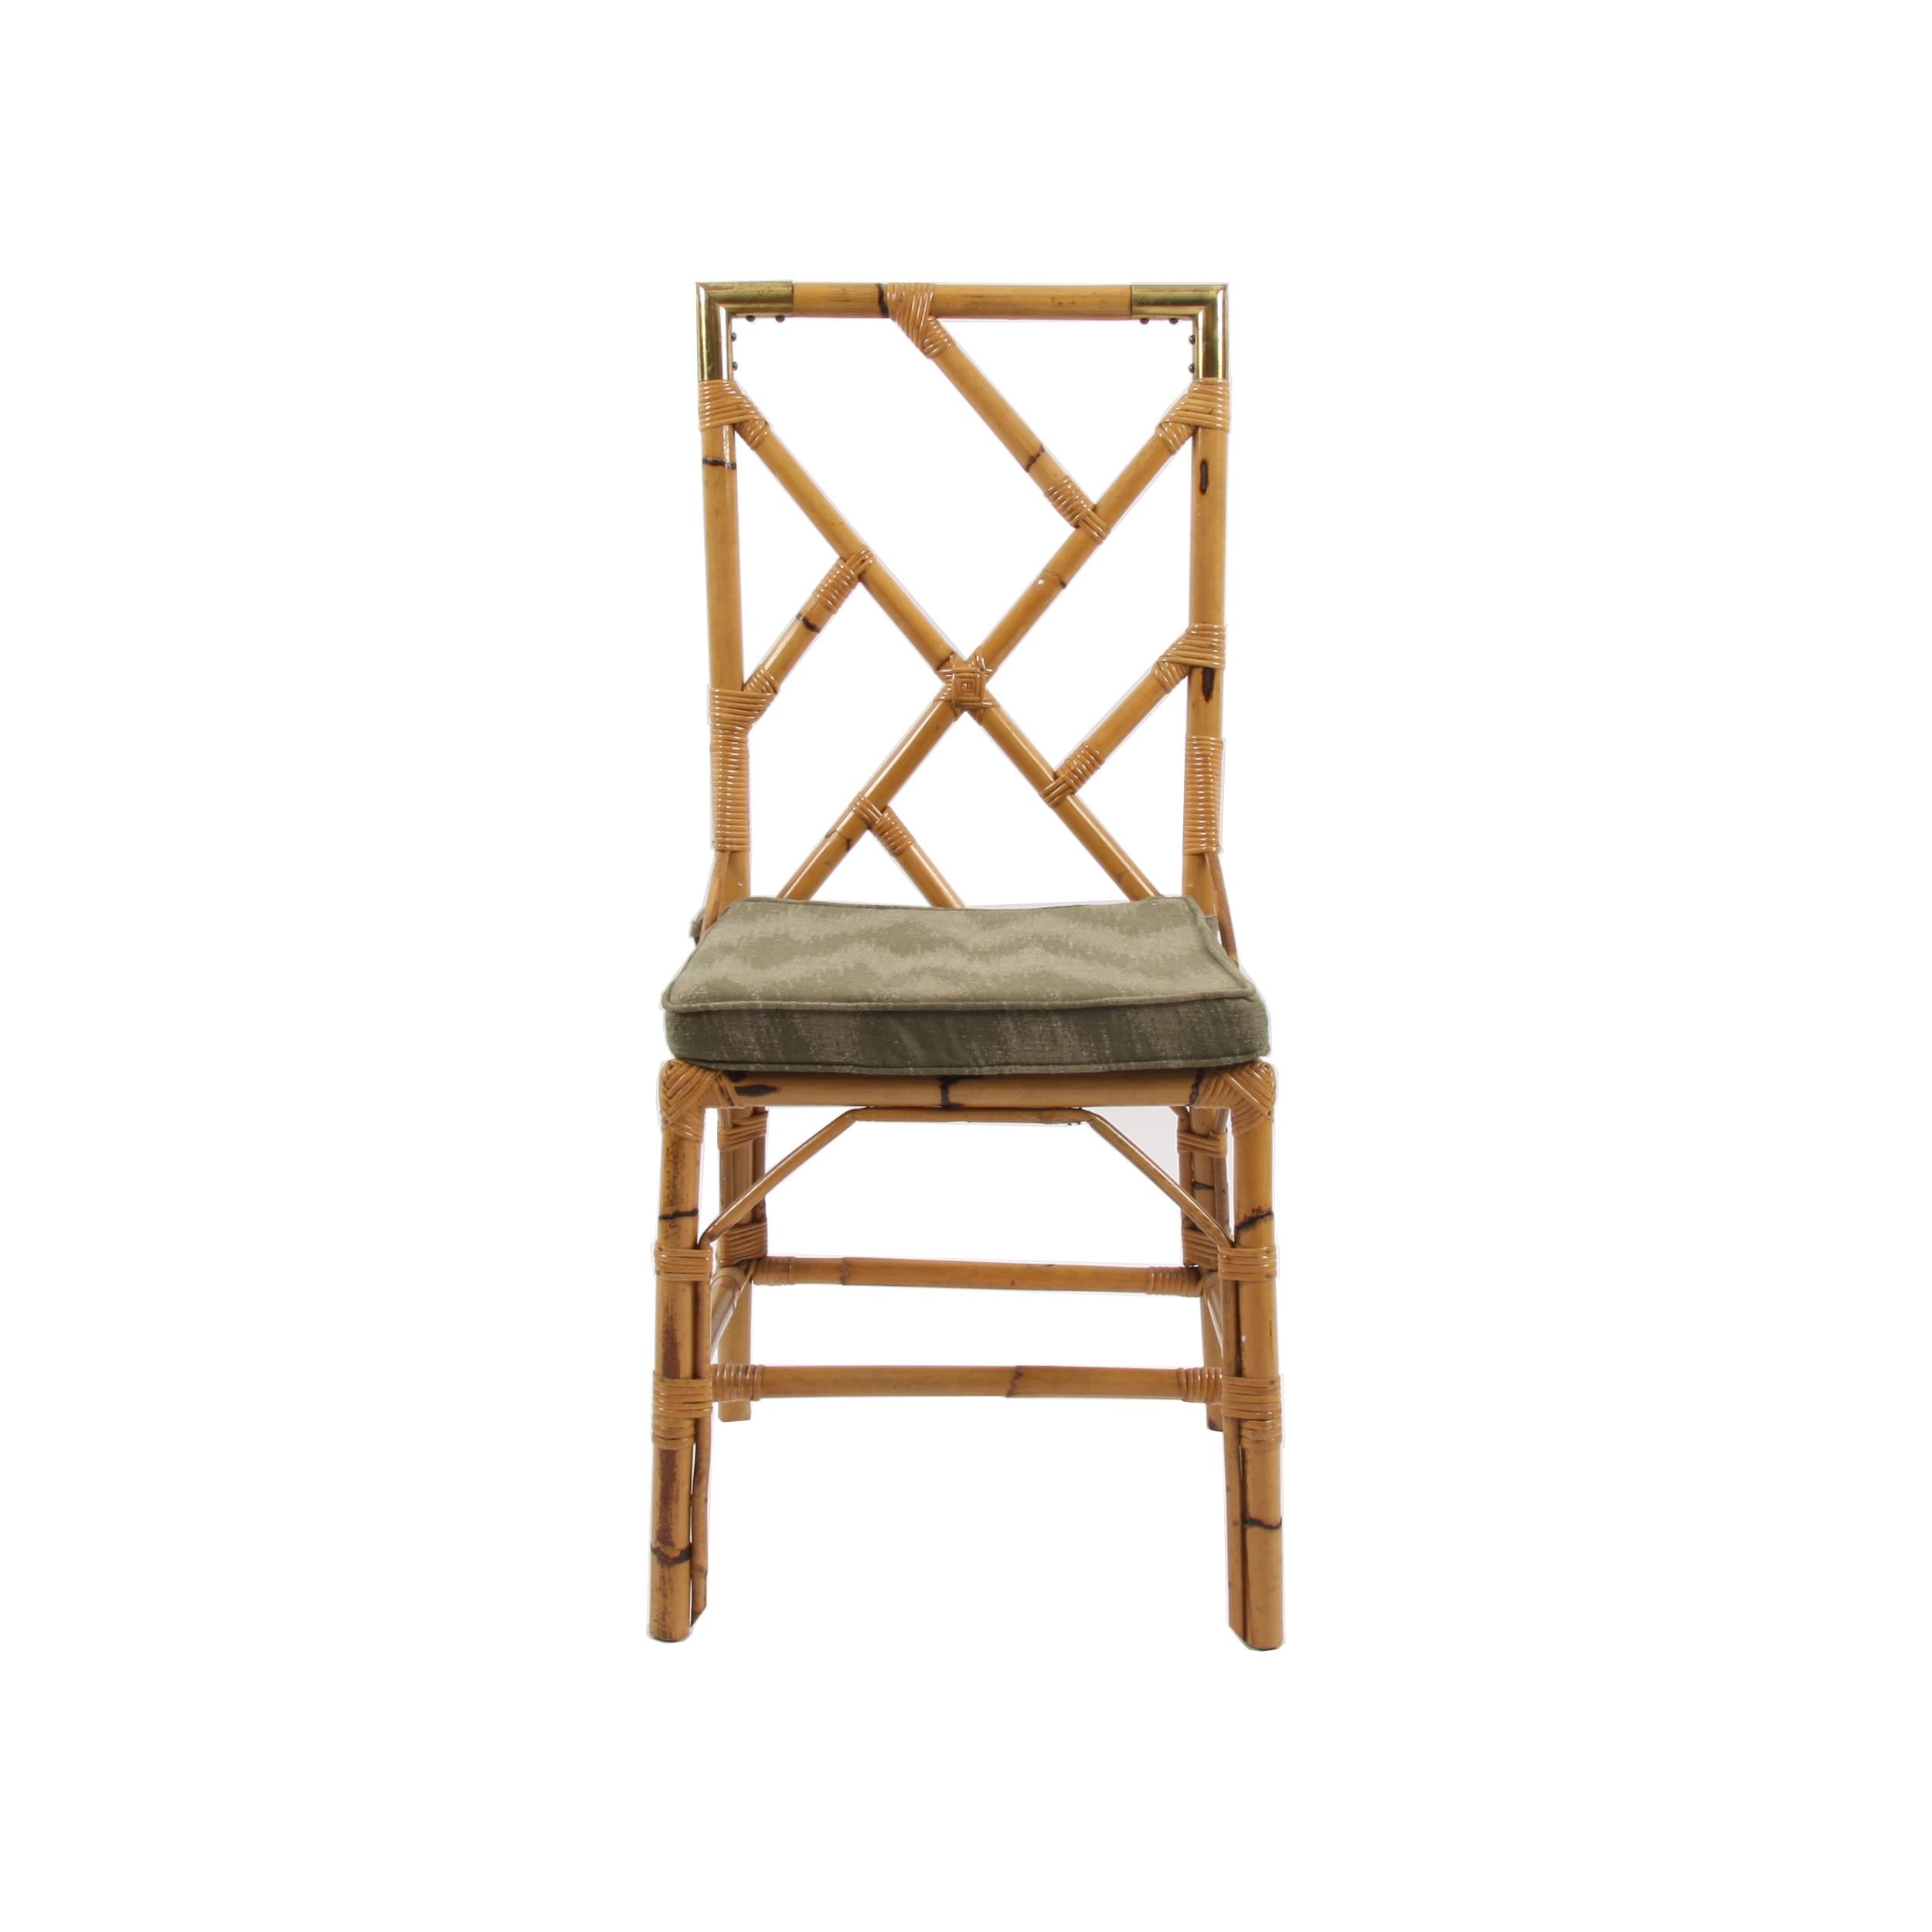 This set of 4 bamboo dining chairs have beautiful green cushions and lovely brass detail.

Made in France in the 1960s for the Galerie Portuondo in Paris. 

Dimensions: Full height 96cm, seat height 43cm and seat depth 40cm.

Price shown is